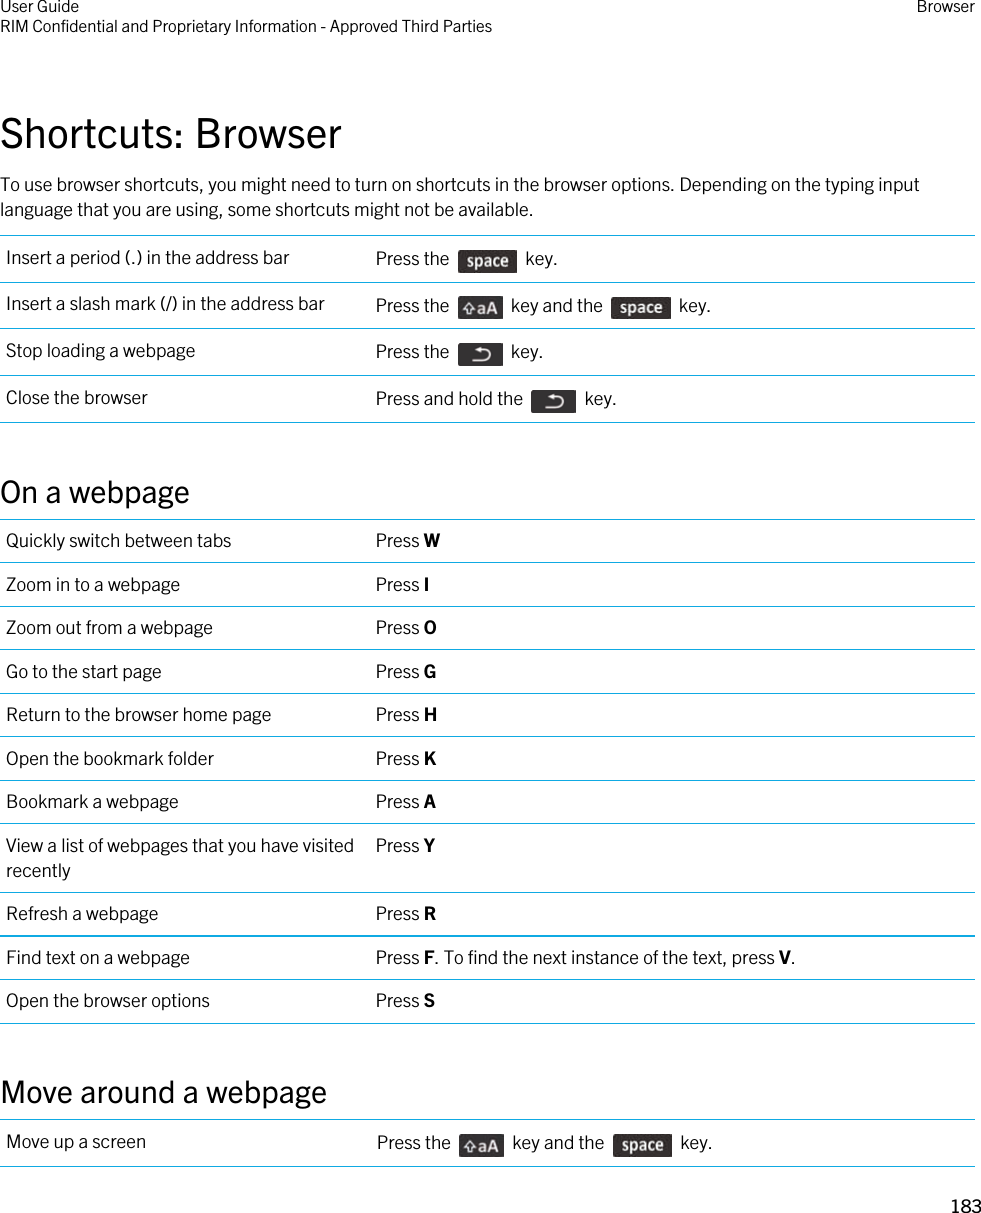 Shortcuts: BrowserTo use browser shortcuts, you might need to turn on shortcuts in the browser options. Depending on the typing input language that you are using, some shortcuts might not be available.Insert a period (.) in the address bar Press the    key.Insert a slash mark (/) in the address bar Press the    key and the    key.Stop loading a webpage Press the    key.Close the browser Press and hold the    key.On a webpageQuickly switch between tabs Press WZoom in to a webpage Press IZoom out from a webpage Press OGo to the start page Press GReturn to the browser home page Press HOpen the bookmark folder Press KBookmark a webpage Press AView a list of webpages that you have visited recentlyPress YRefresh a webpage Press RFind text on a webpage Press F. To find the next instance of the text, press V.Open the browser options Press SMove around a webpageMove up a screen Press the    key and the    key.User GuideRIM Confidential and Proprietary Information - Approved Third Parties Browser183 